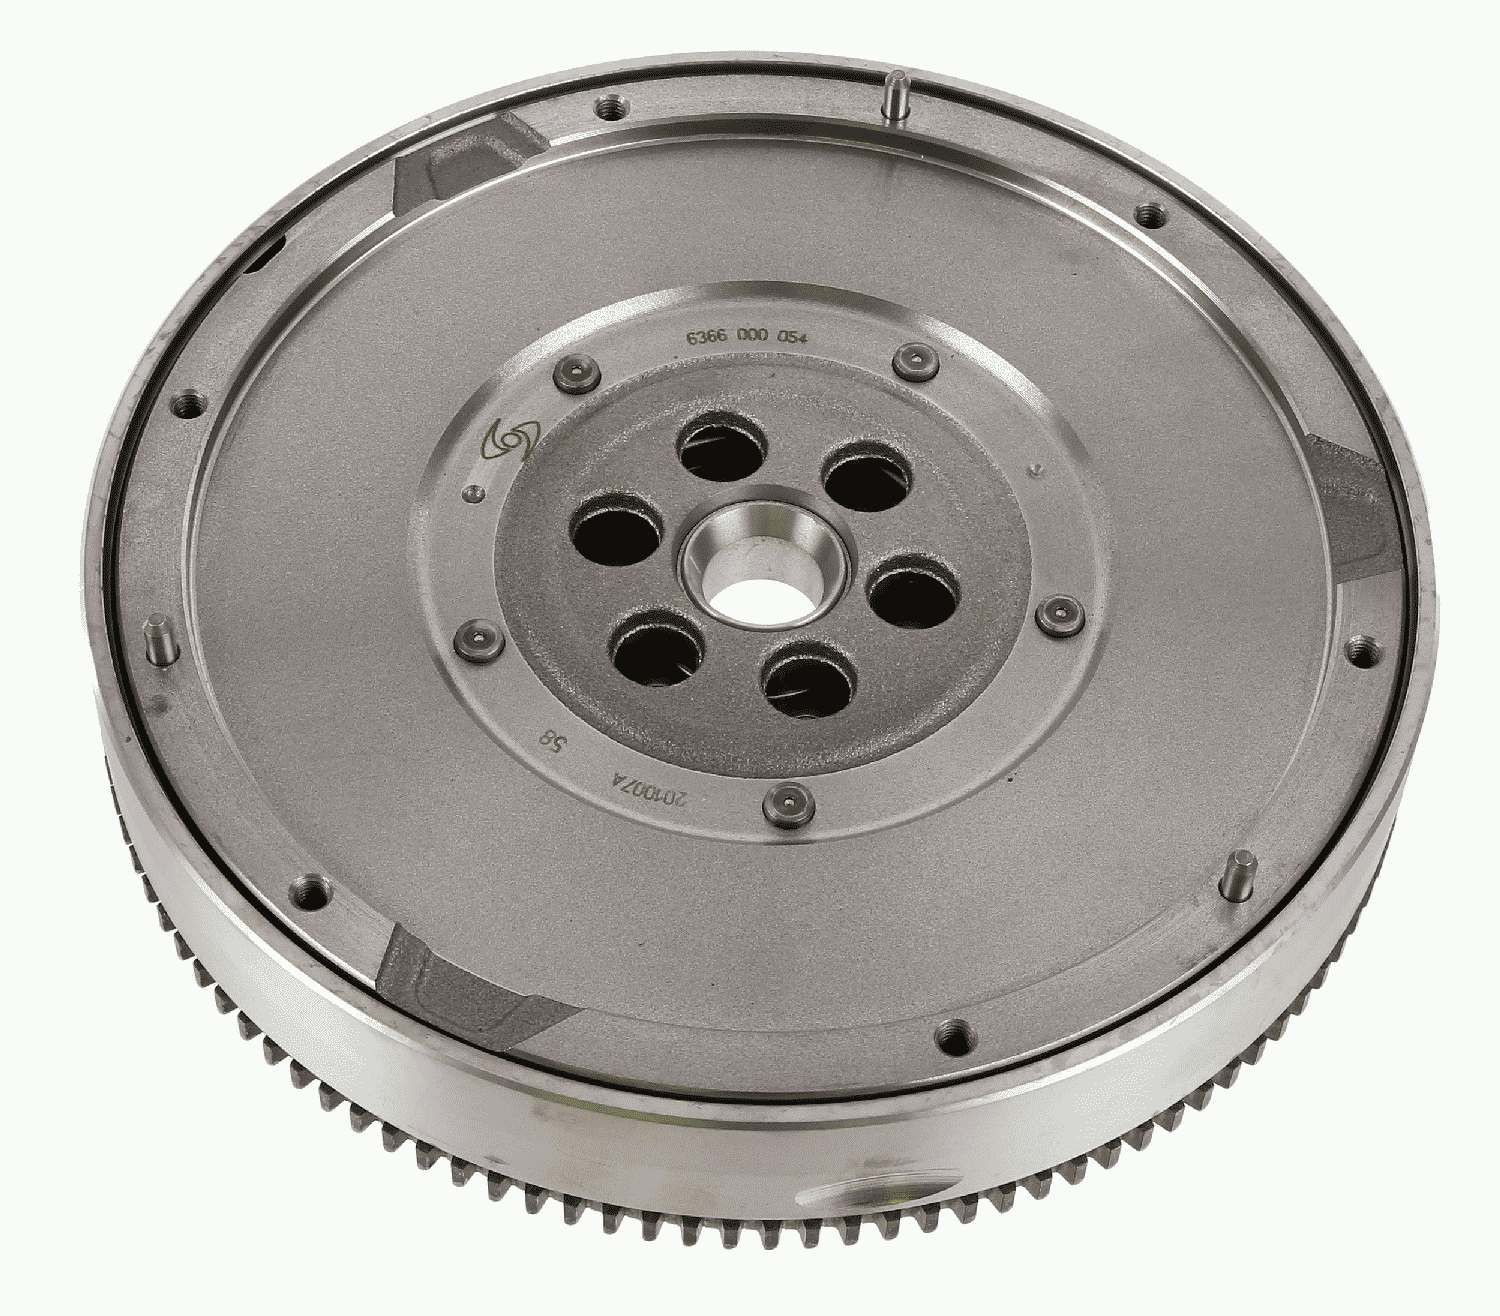 Ford Dual mass flywheel SACHS 6366 000 054 at a good price